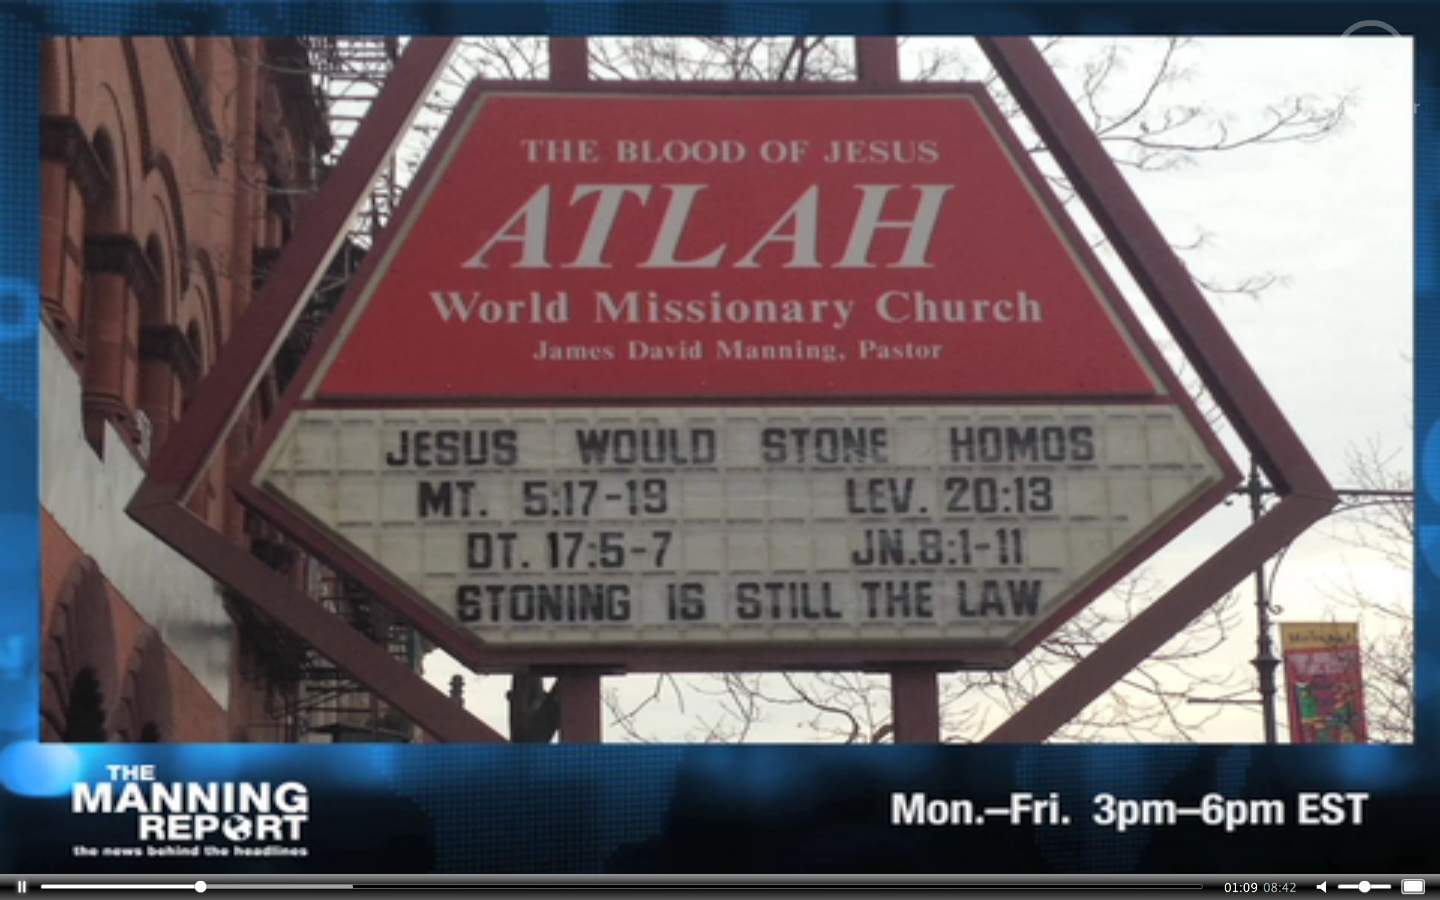 Vandalism of homophobic church sign ruled a “hate crime” by NYPD